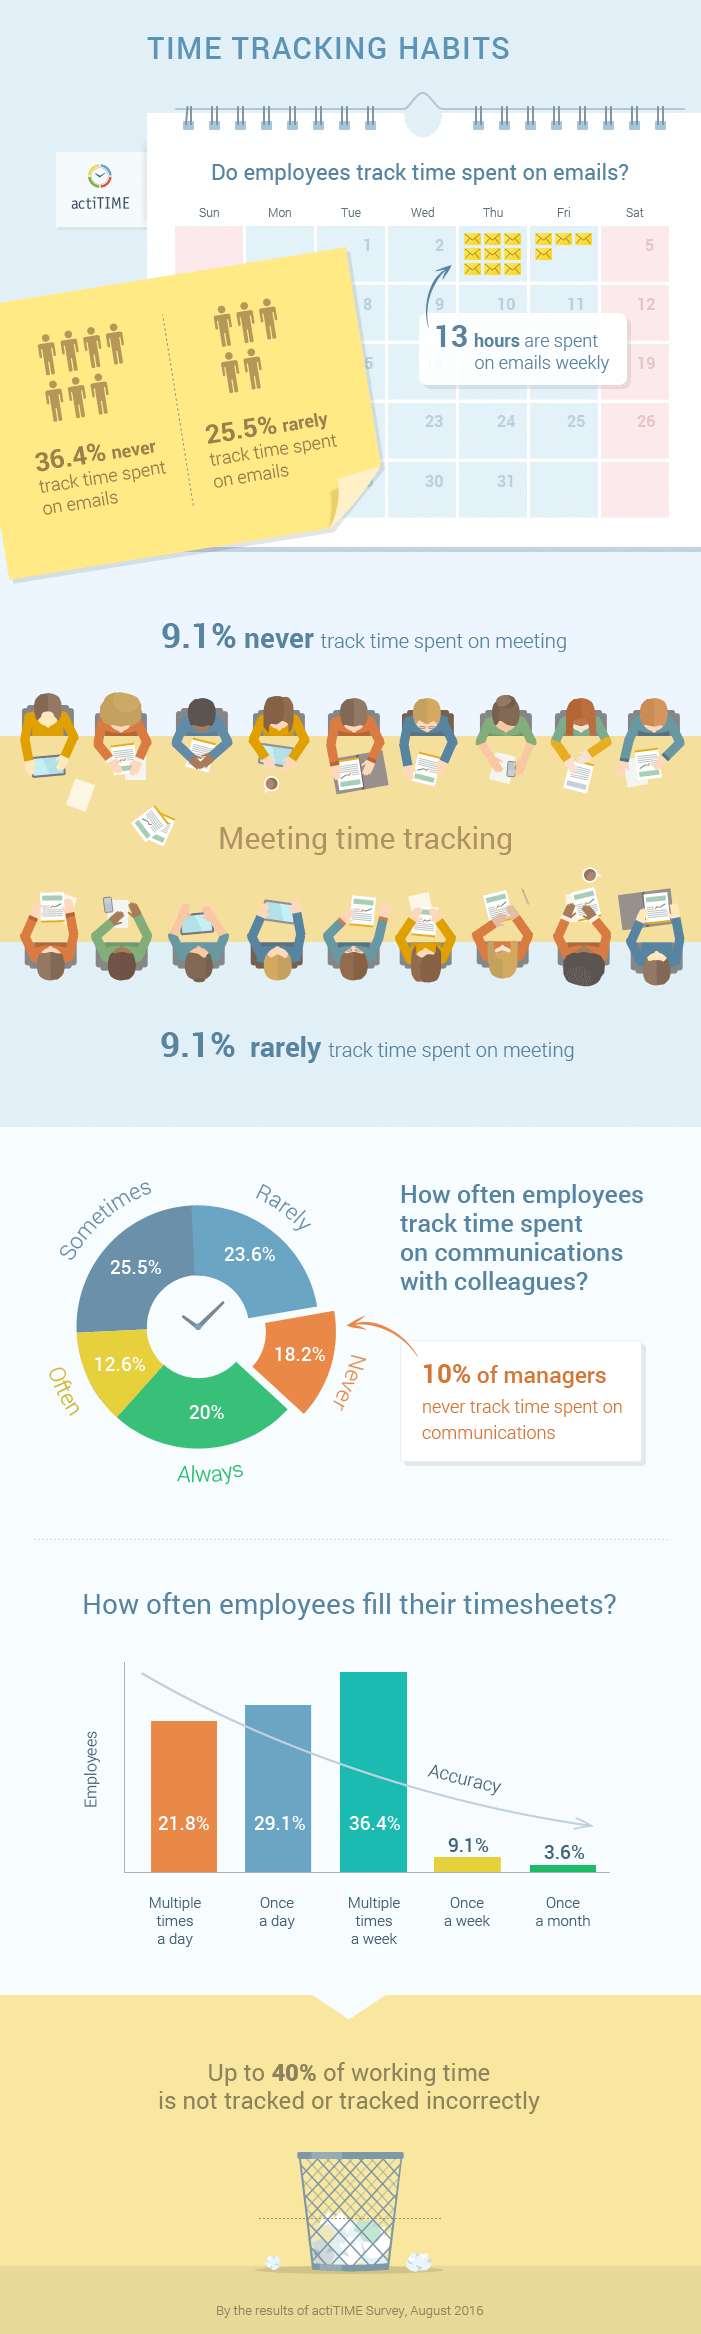 Bad Time Tracking Habits Infographic